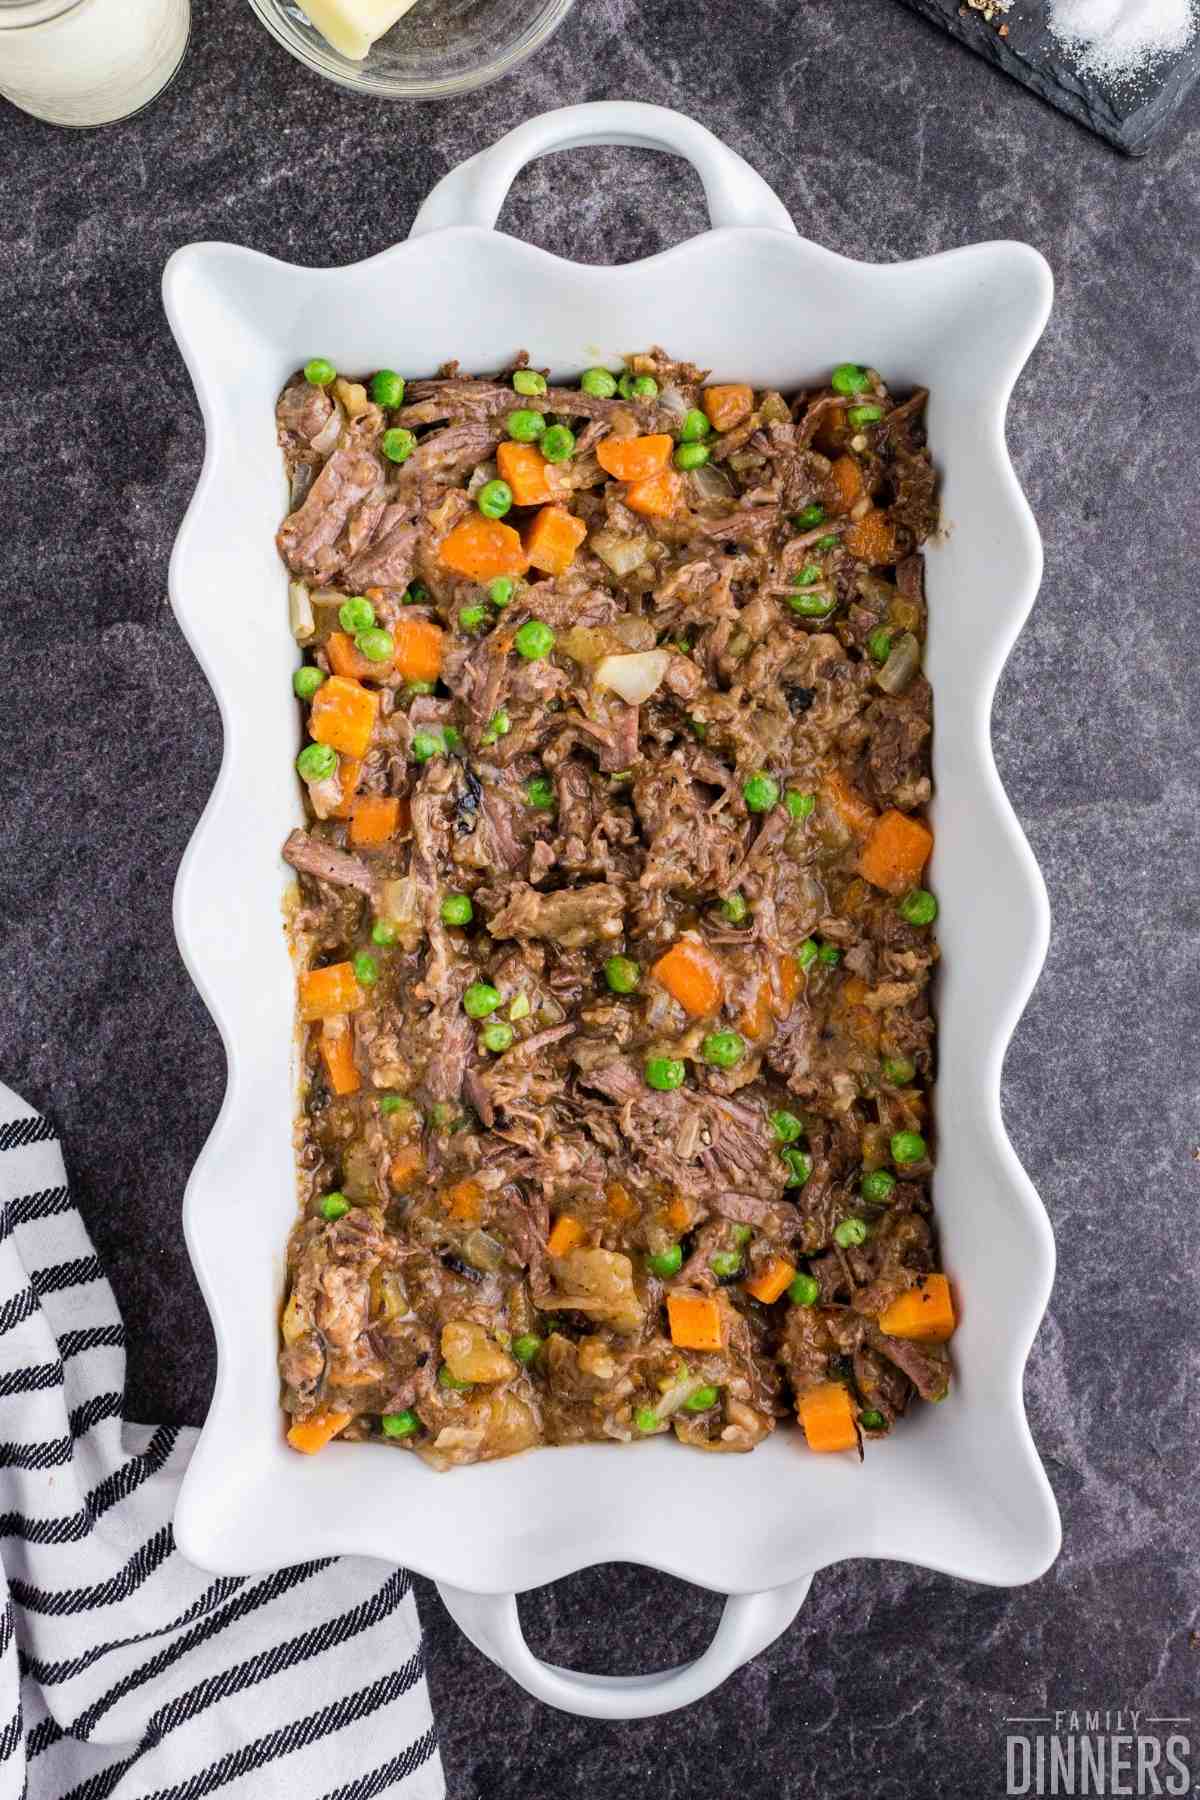 white scalloped casserole dish full of pot roast leftovers shredded beef, carrots and potatoes